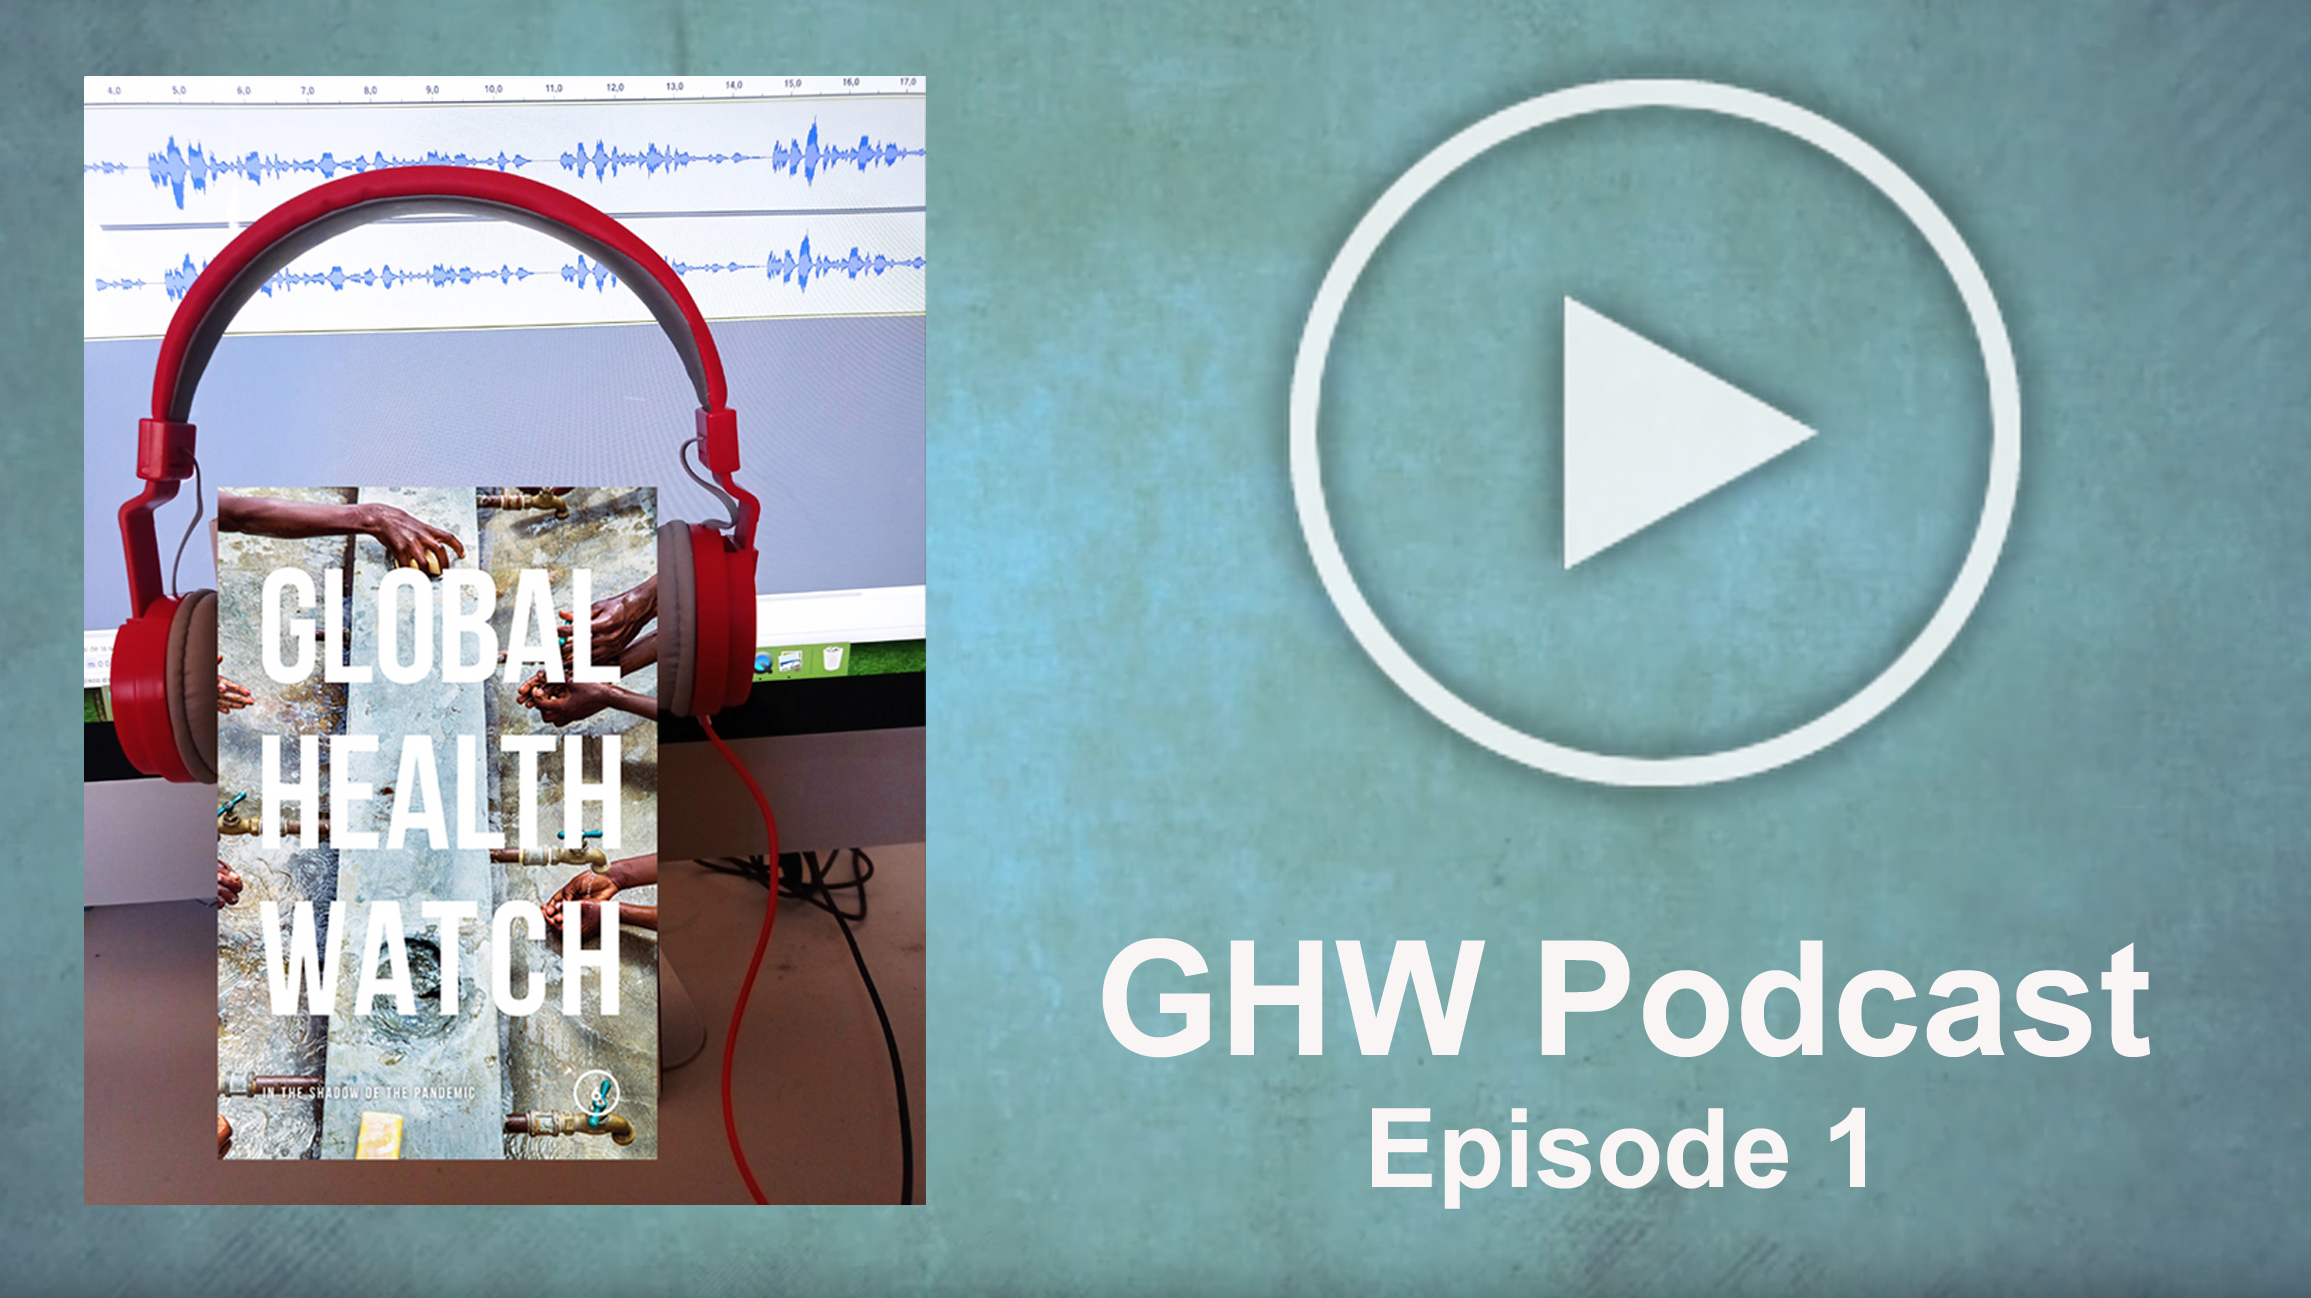 GHW podcast